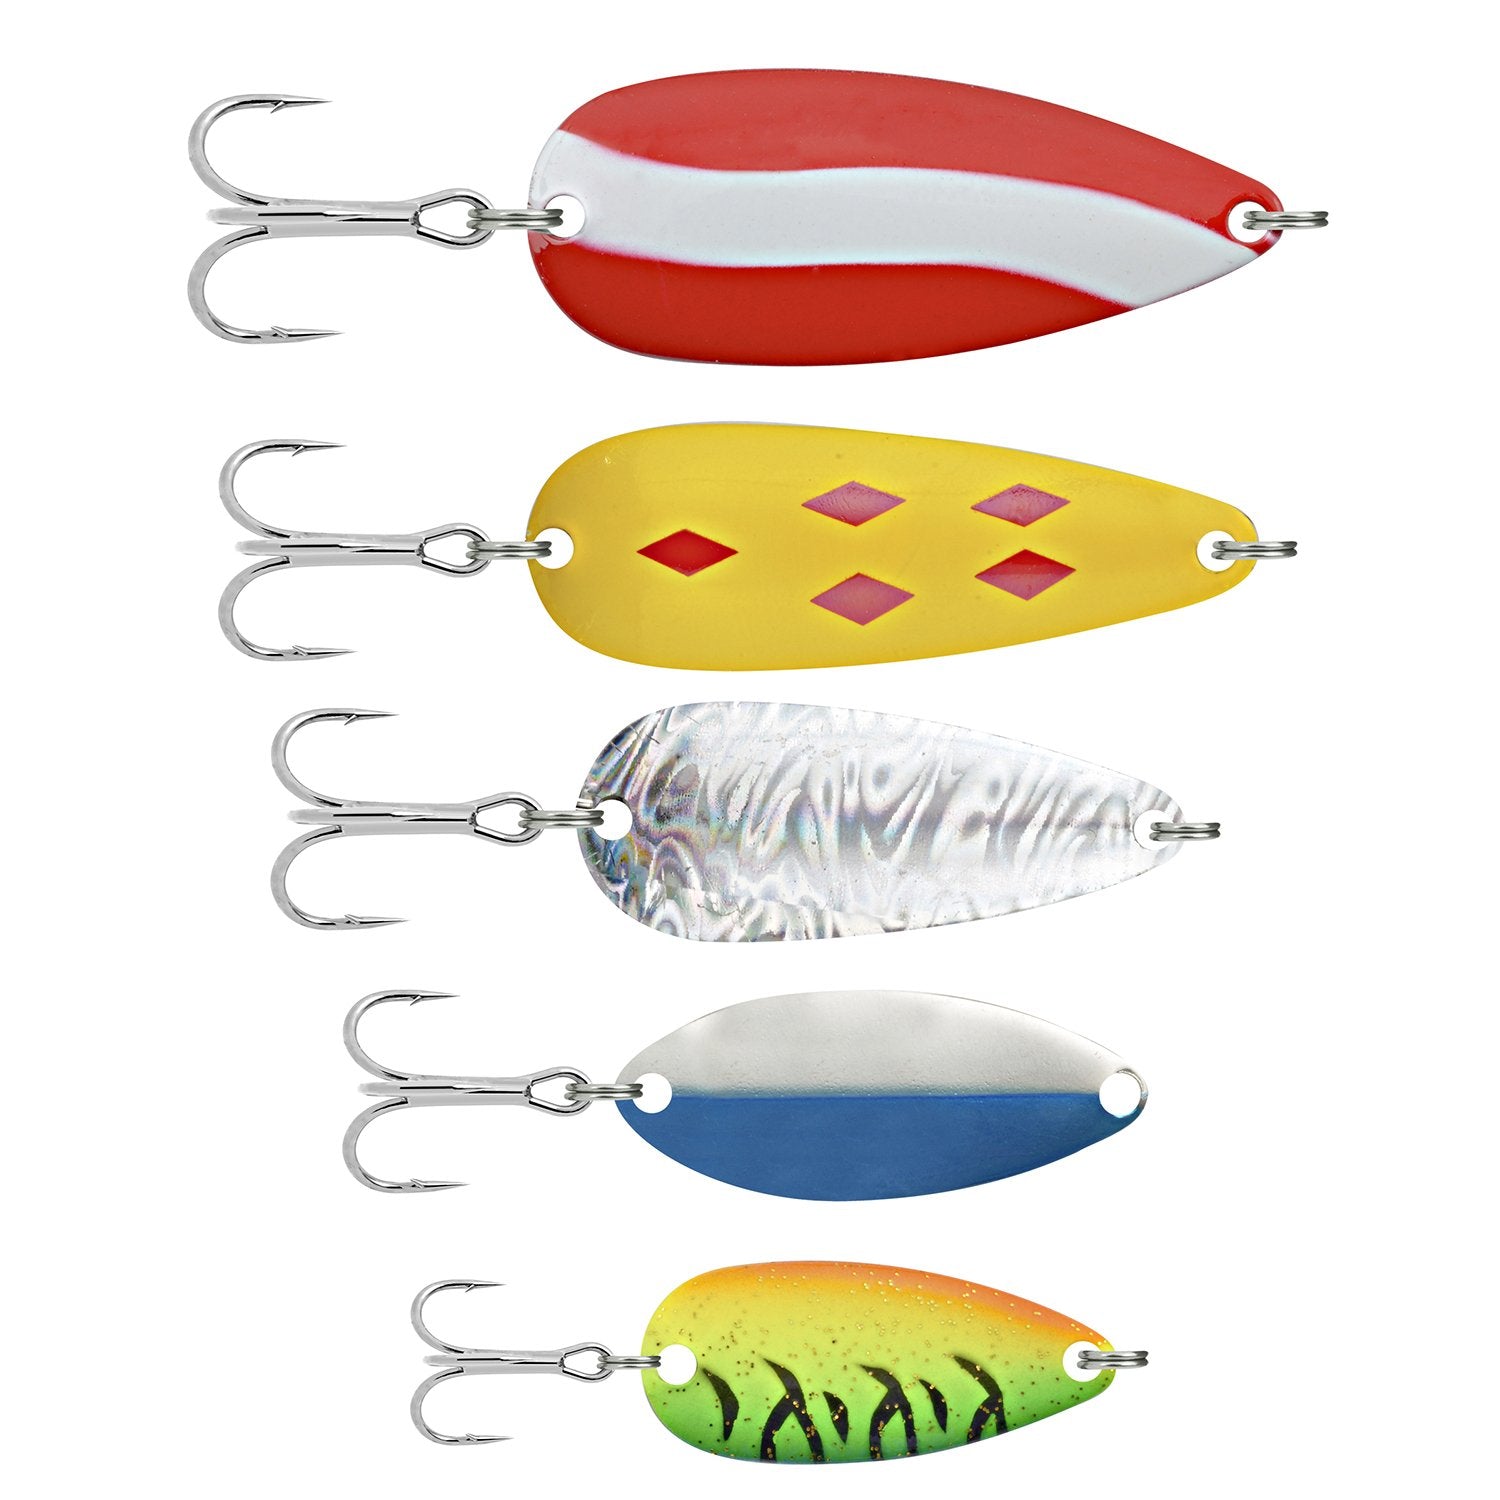 Red & White Fishing Spoons